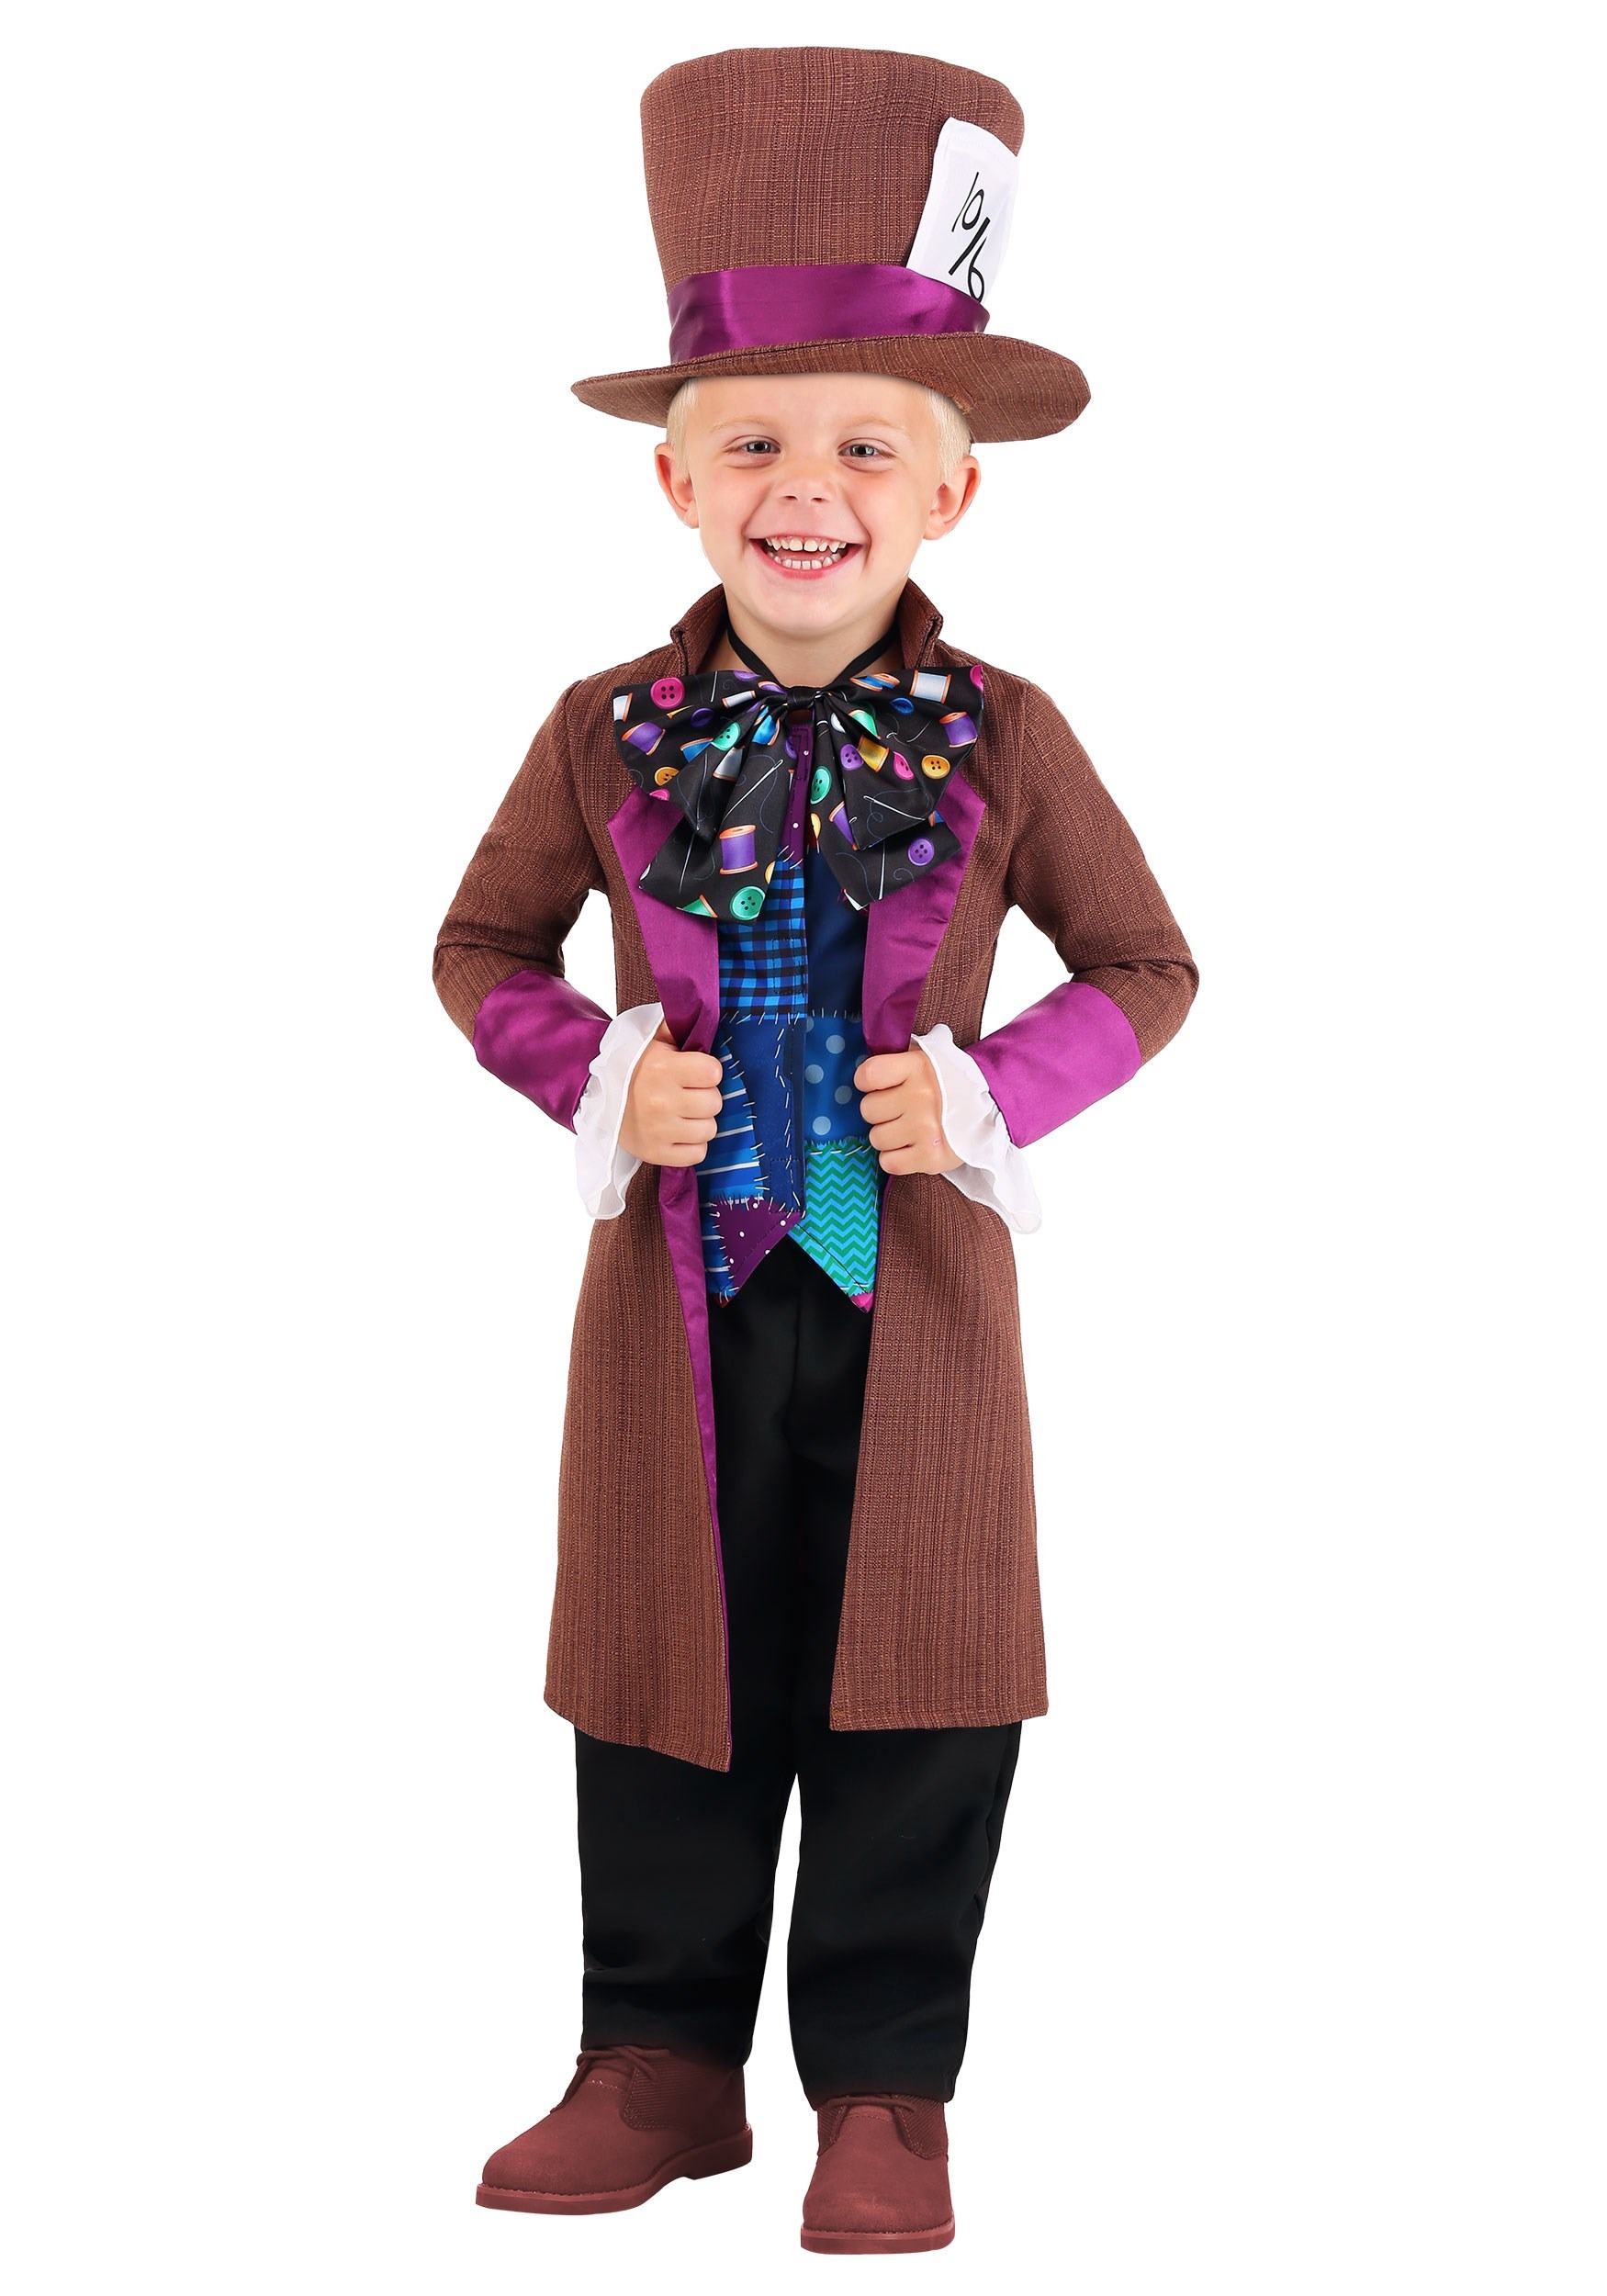 Wacky Mad Hatter Costume for Toddlers